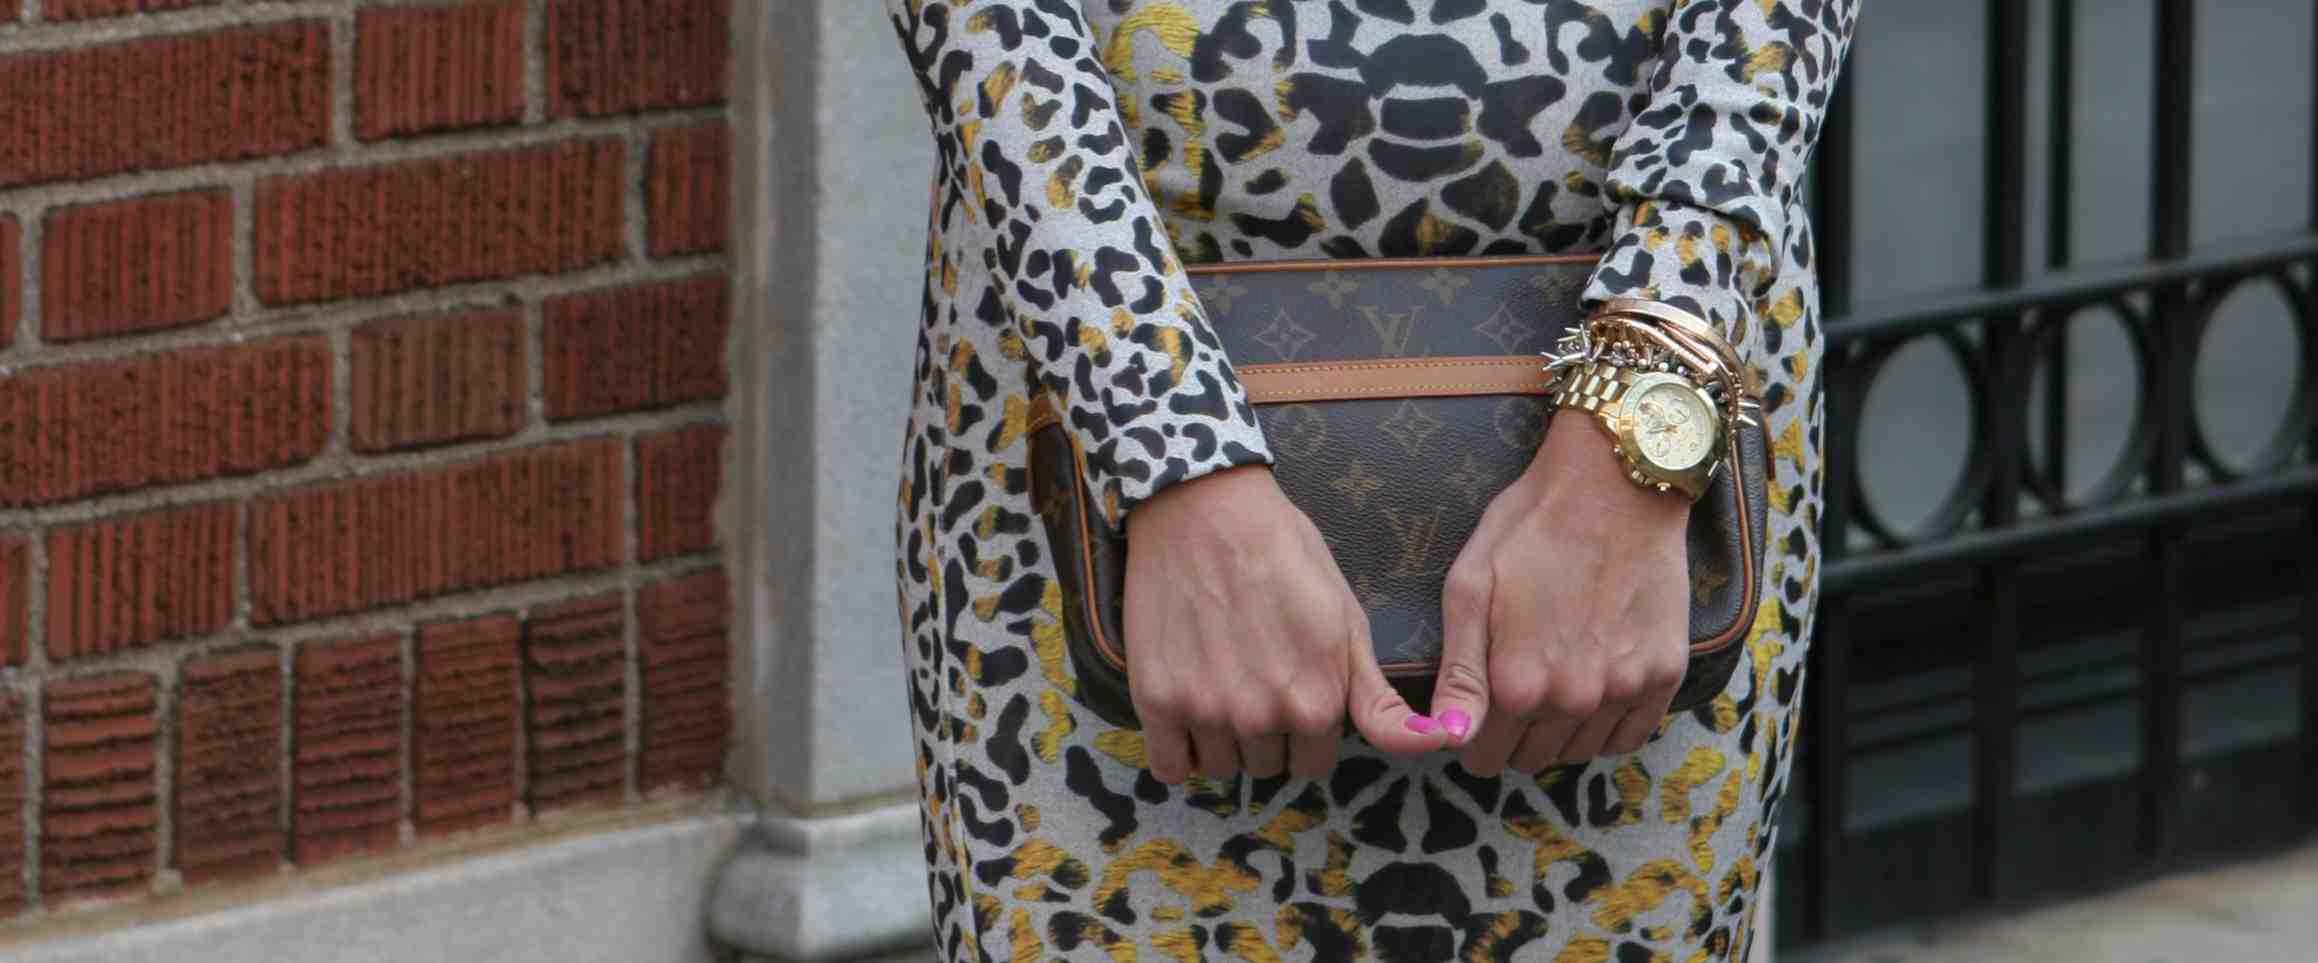 CrashingRED Louis Vuitton clutch, styling, emerald nails, Mimco statement  ring, dressing up for a dinner, fshion blog - CrashingRED